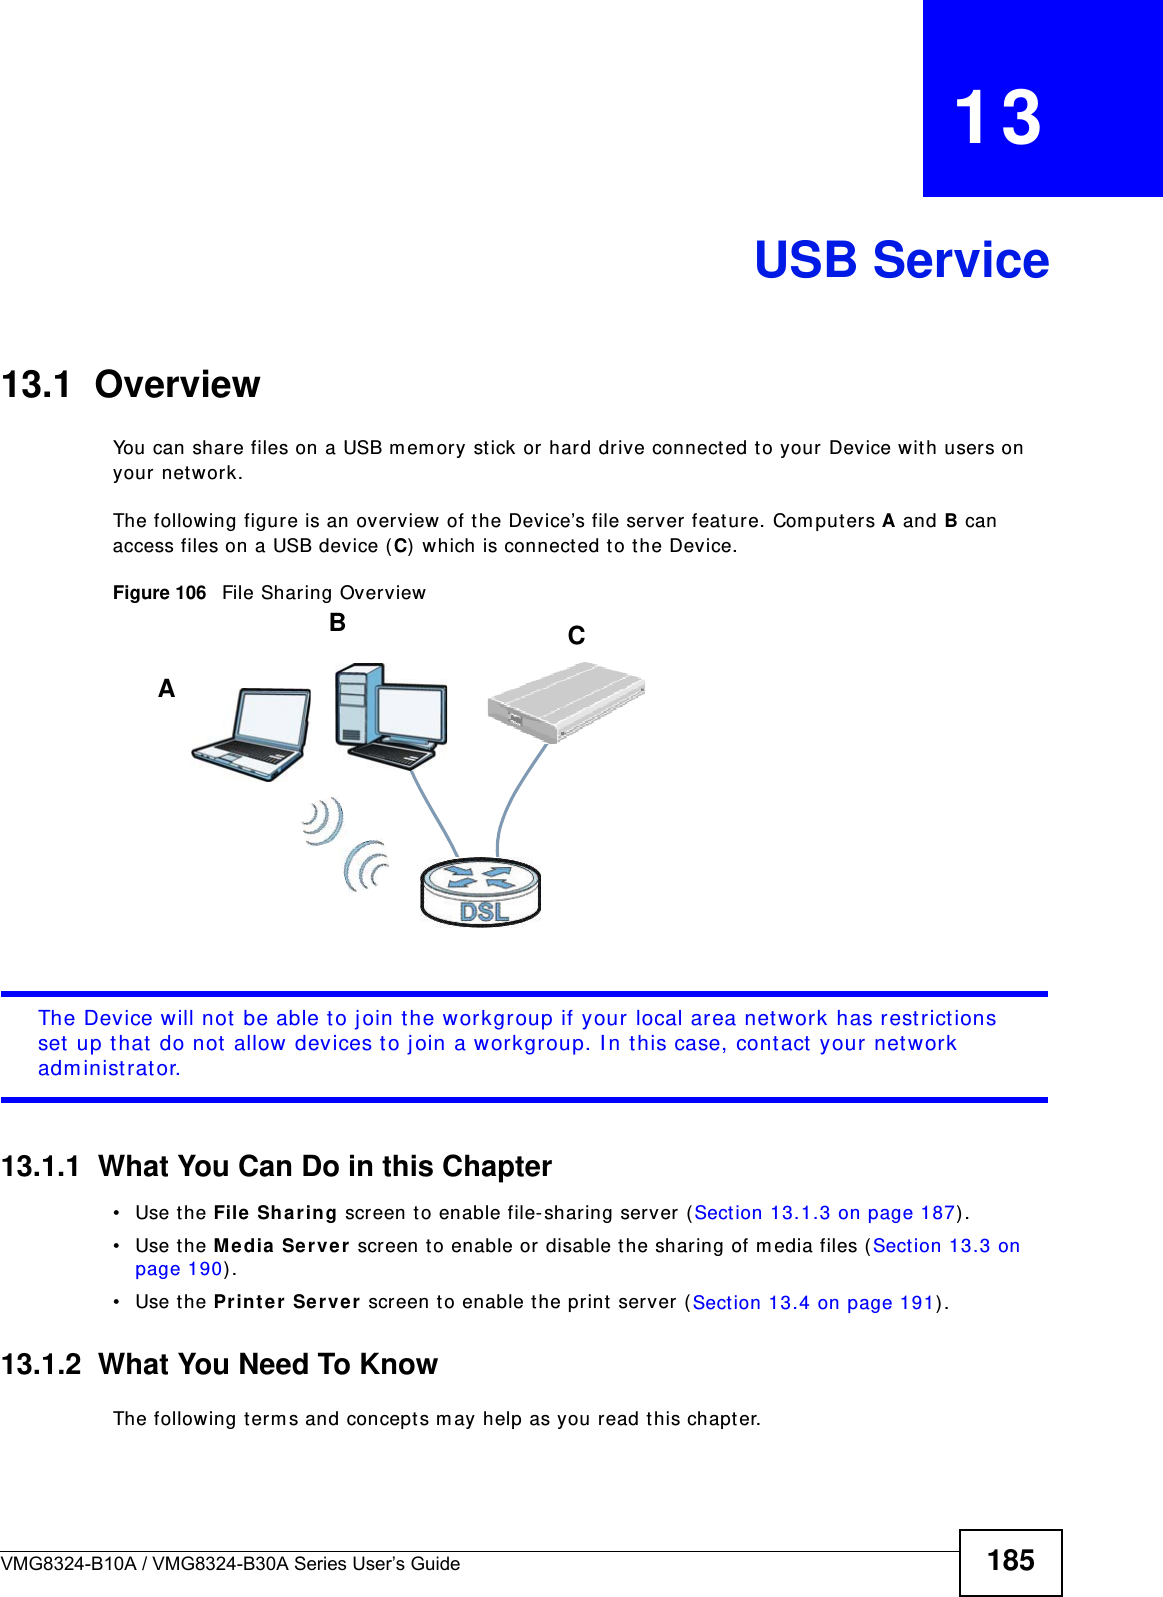 VMG8324-B10A / VMG8324-B30A Series User’s Guide 185CHAPTER   13USB Service13.1  Overview You can share files on a USB m em ory st ick or hard drive connected t o your Device wit h users on your net work. The following figure is an overview of t he Device’s file server feat ure. Com put ers A and B can access files on a USB device ( C)  which is connect ed to the Device.Figure 106   File Sharing OverviewThe Device will not be able t o j oin the workgroup if your local area network has restrict ions set up t hat  do not allow devices t o j oin a workgroup. I n this case, cont act  your net work  adm inistrat or.13.1.1  What You Can Do in this Chapter• Use the File  Sh a ring screen t o enable file-sharing server (Sect ion 13.1.3 on page 187) . • Use the M edia  Se r ve r  screen to enable or disable t he sharing of m edia files ( Sect ion 13.3 on page 190) .• Use the Pr int er  Se rver scr een t o enable t he print  server (Sect ion 13.4 on page 191) .13.1.2  What You Need To KnowThe following t erm s and concept s m ay help as you read t his chapt er.ABC